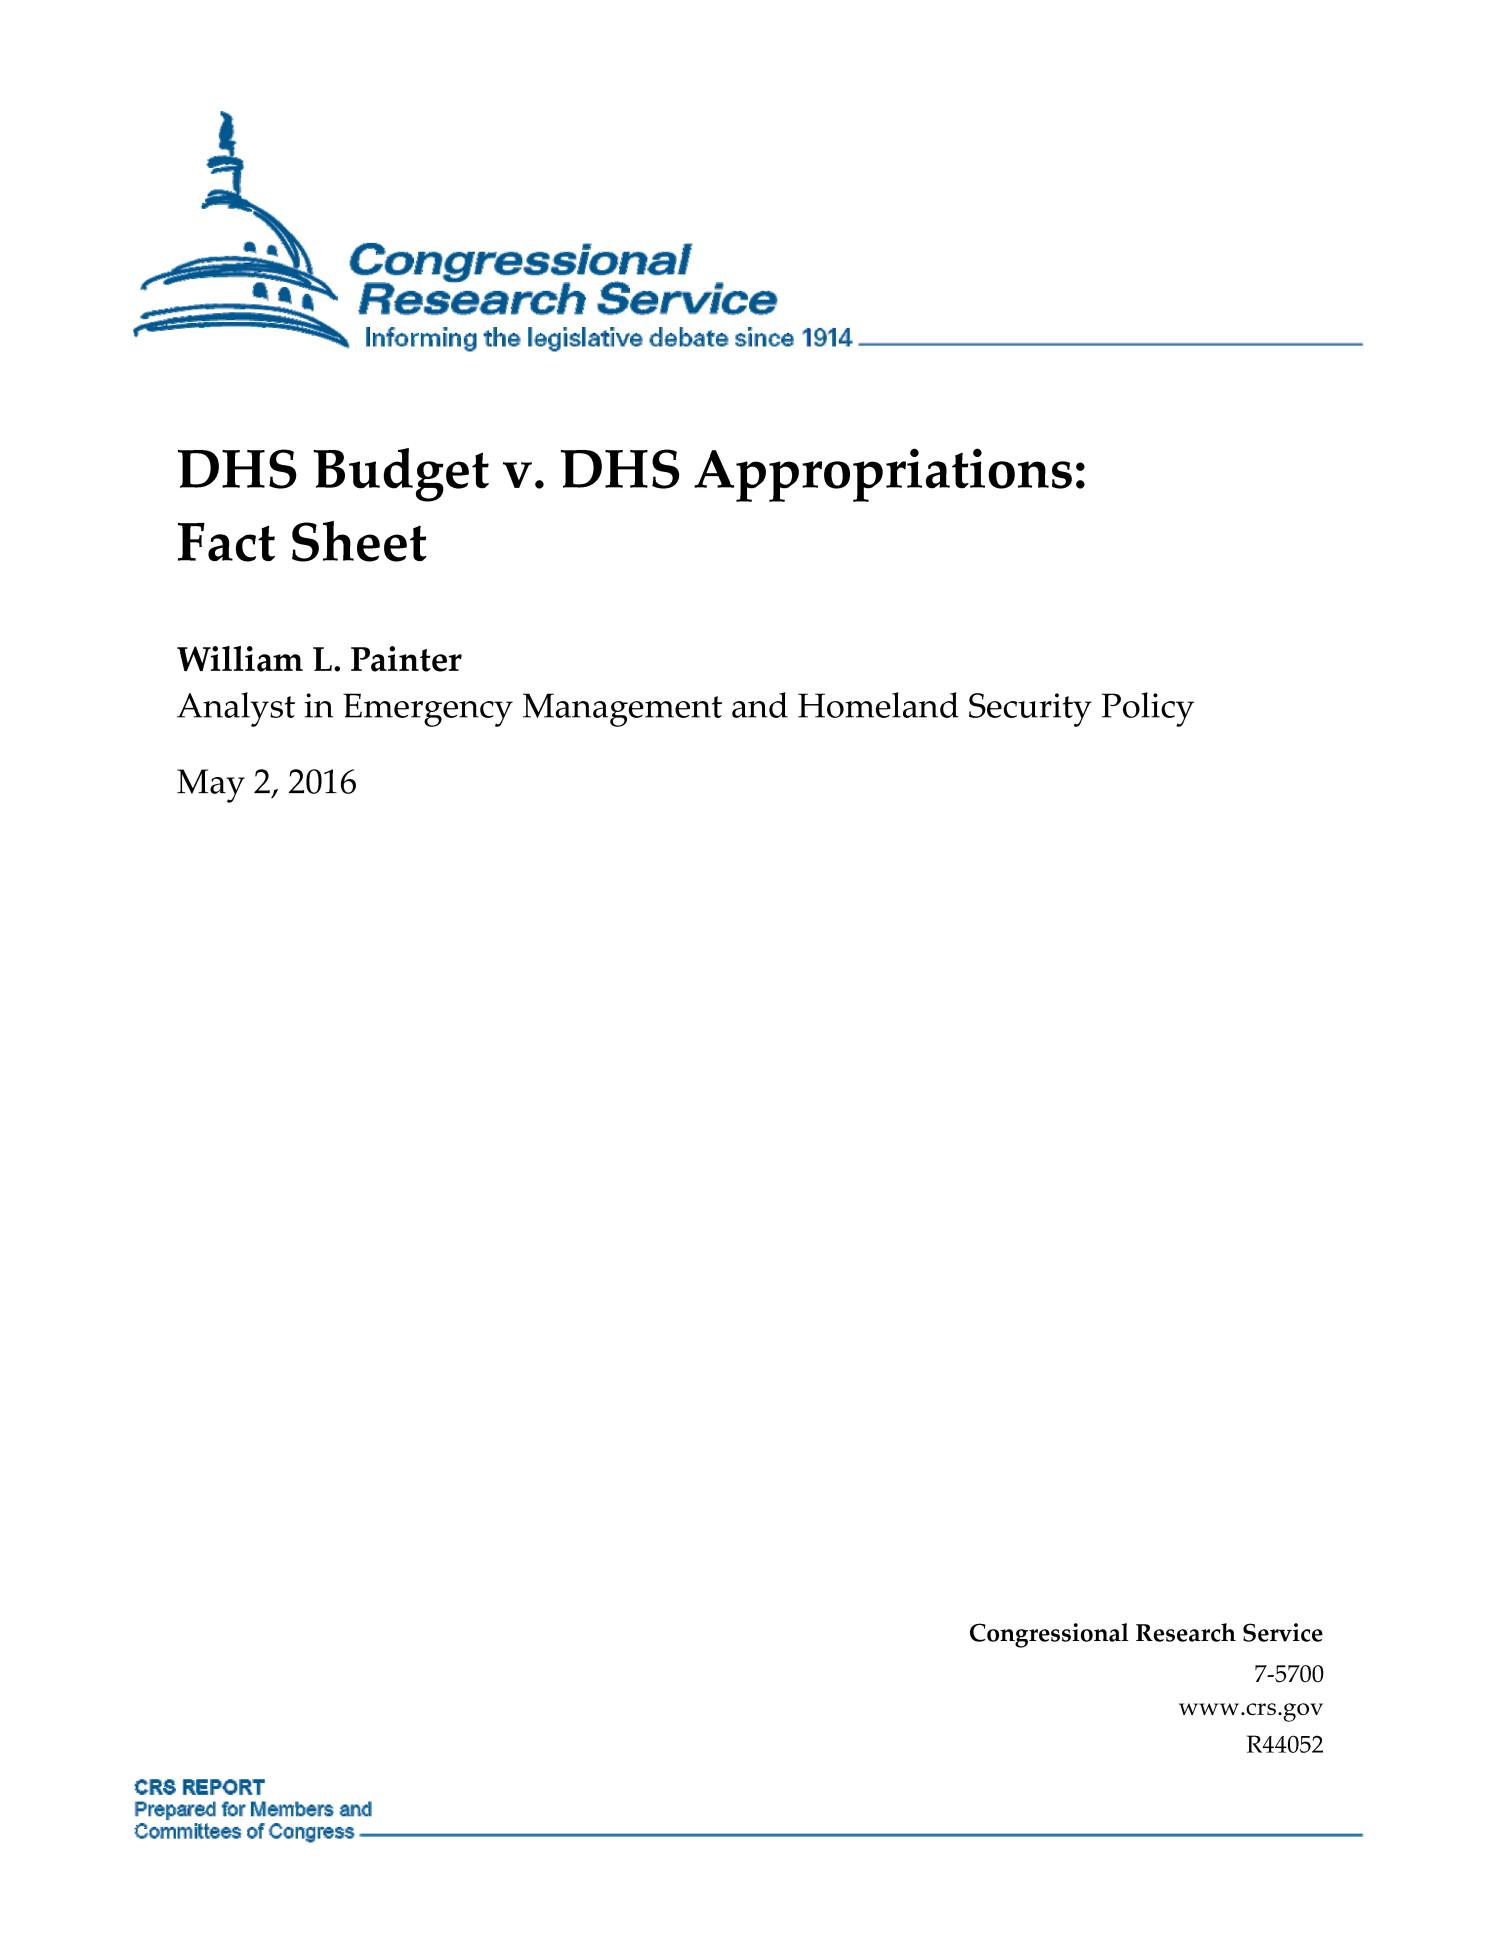 DHS Budget v. DHS Appropriations Fact Sheet UNT Digital Library